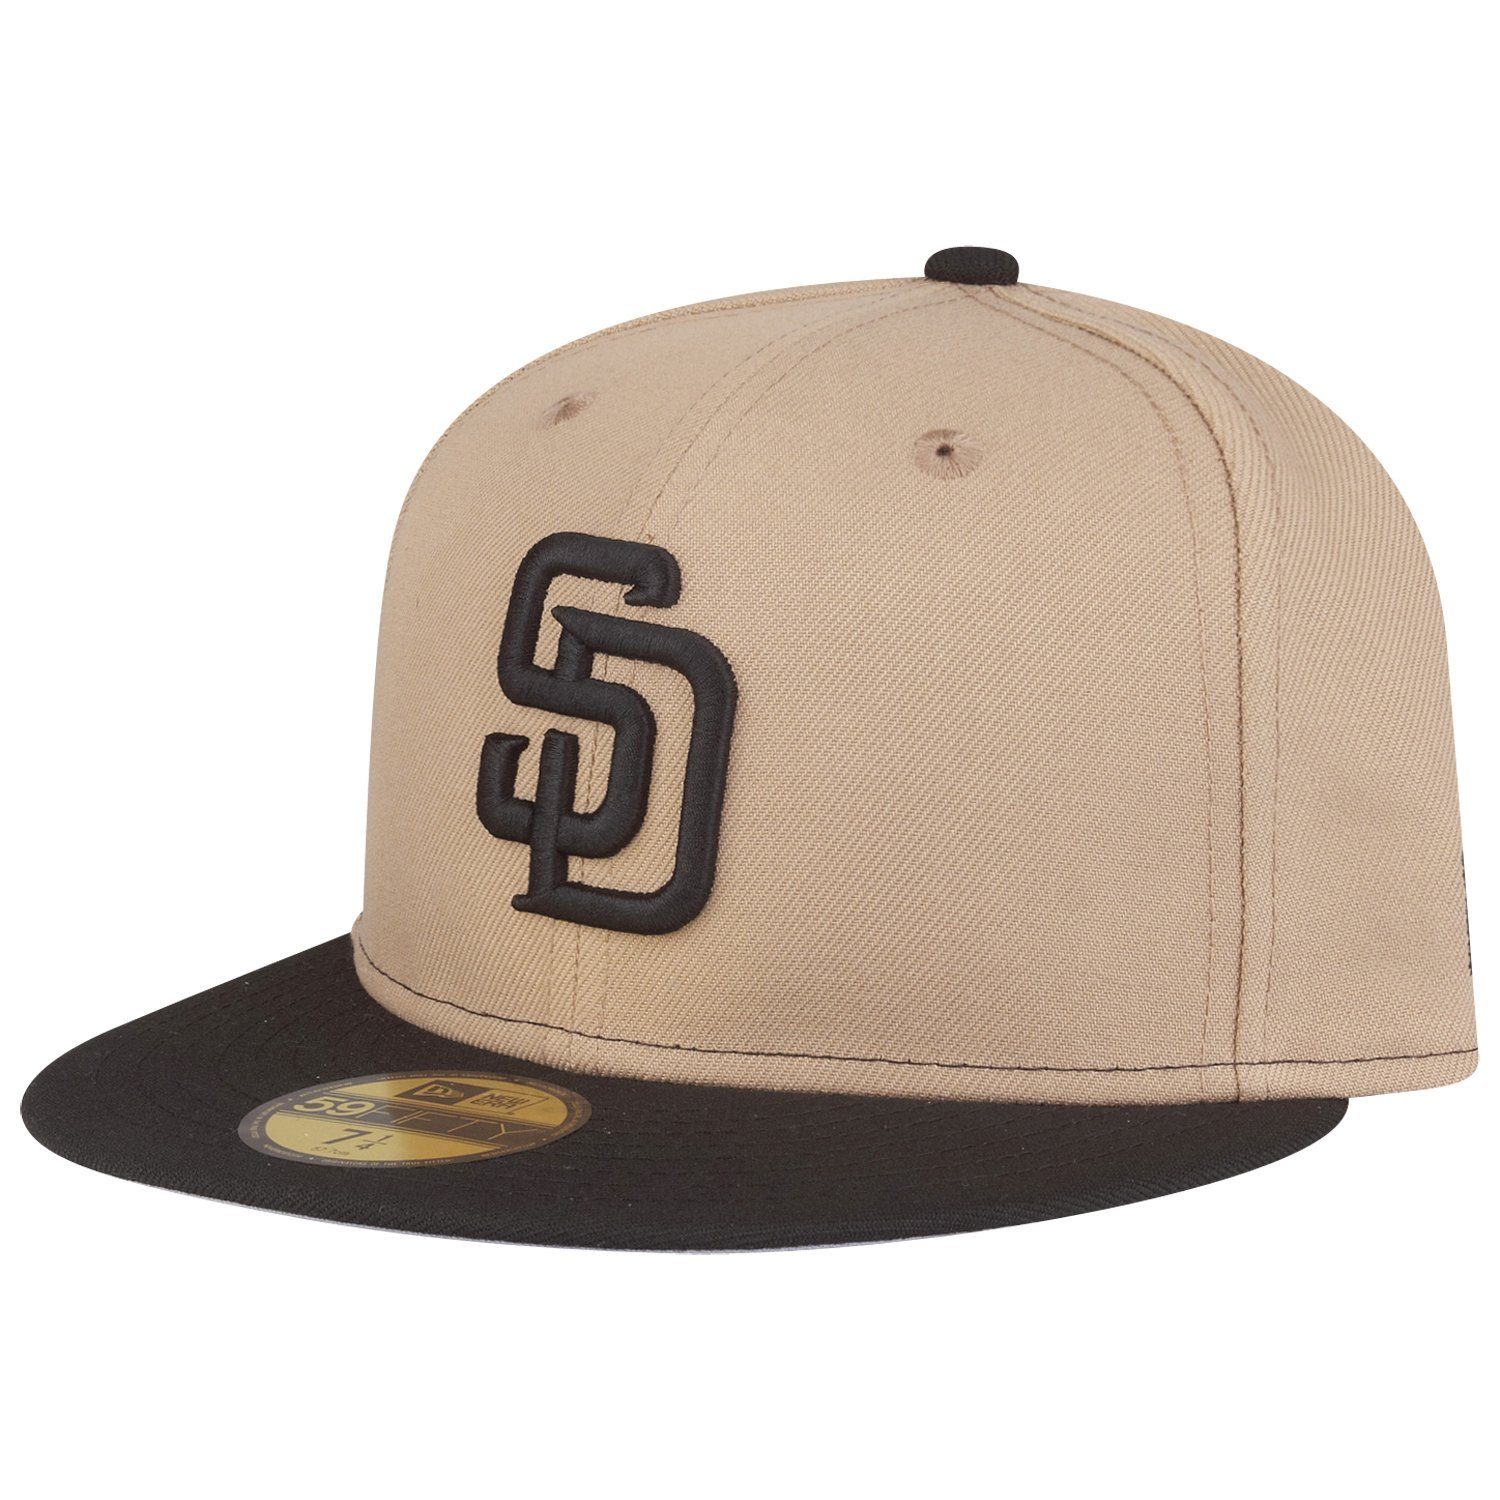 Fitted New MLB 59Fifty Era San Padres Cap Diego